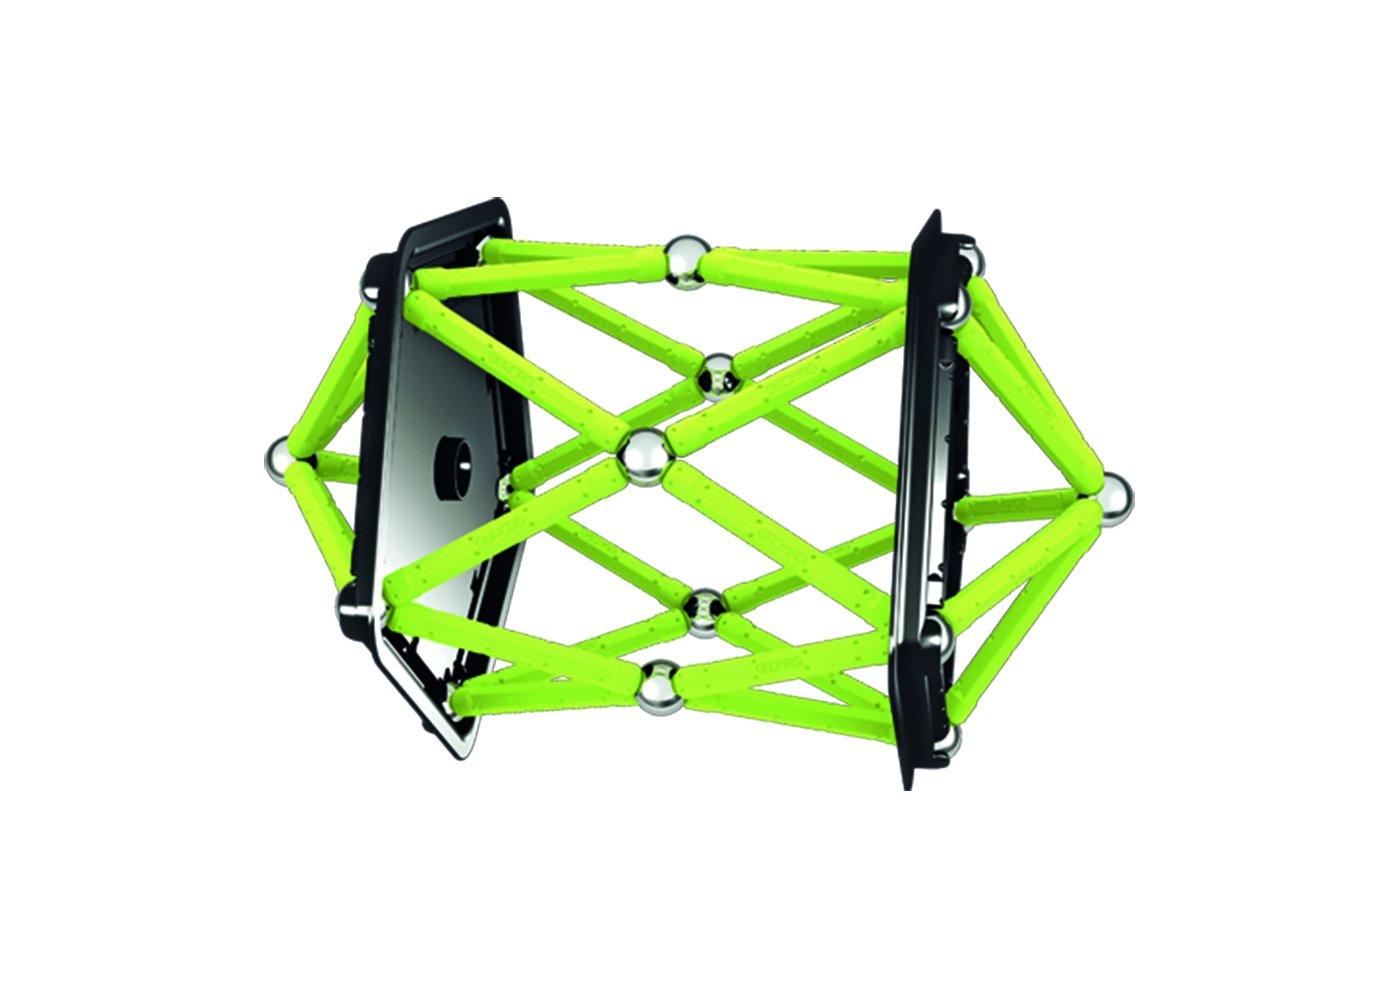 Joc 64 piese - Glow Magnetic Construction | Geomag - 5